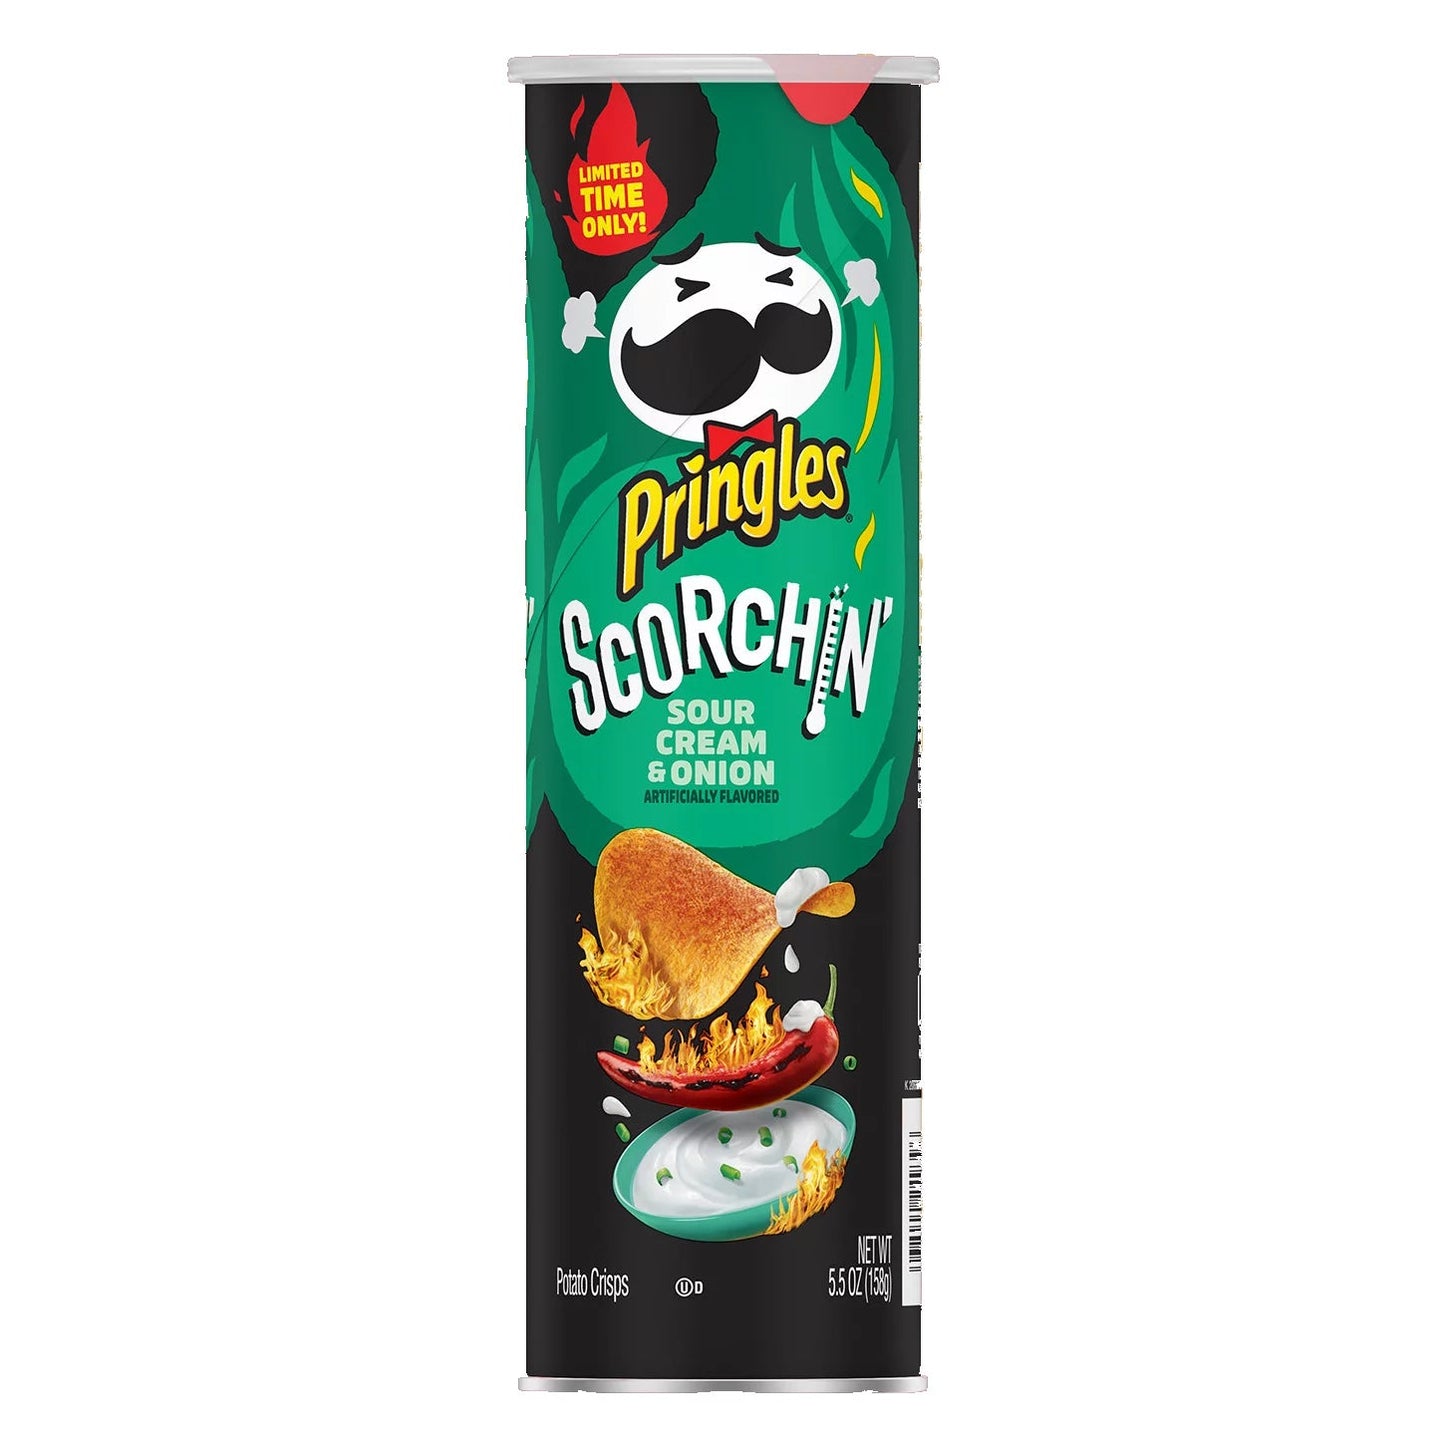 Pringles Scorchin' Sour Cream and Onion 158g - Candy Mail UK